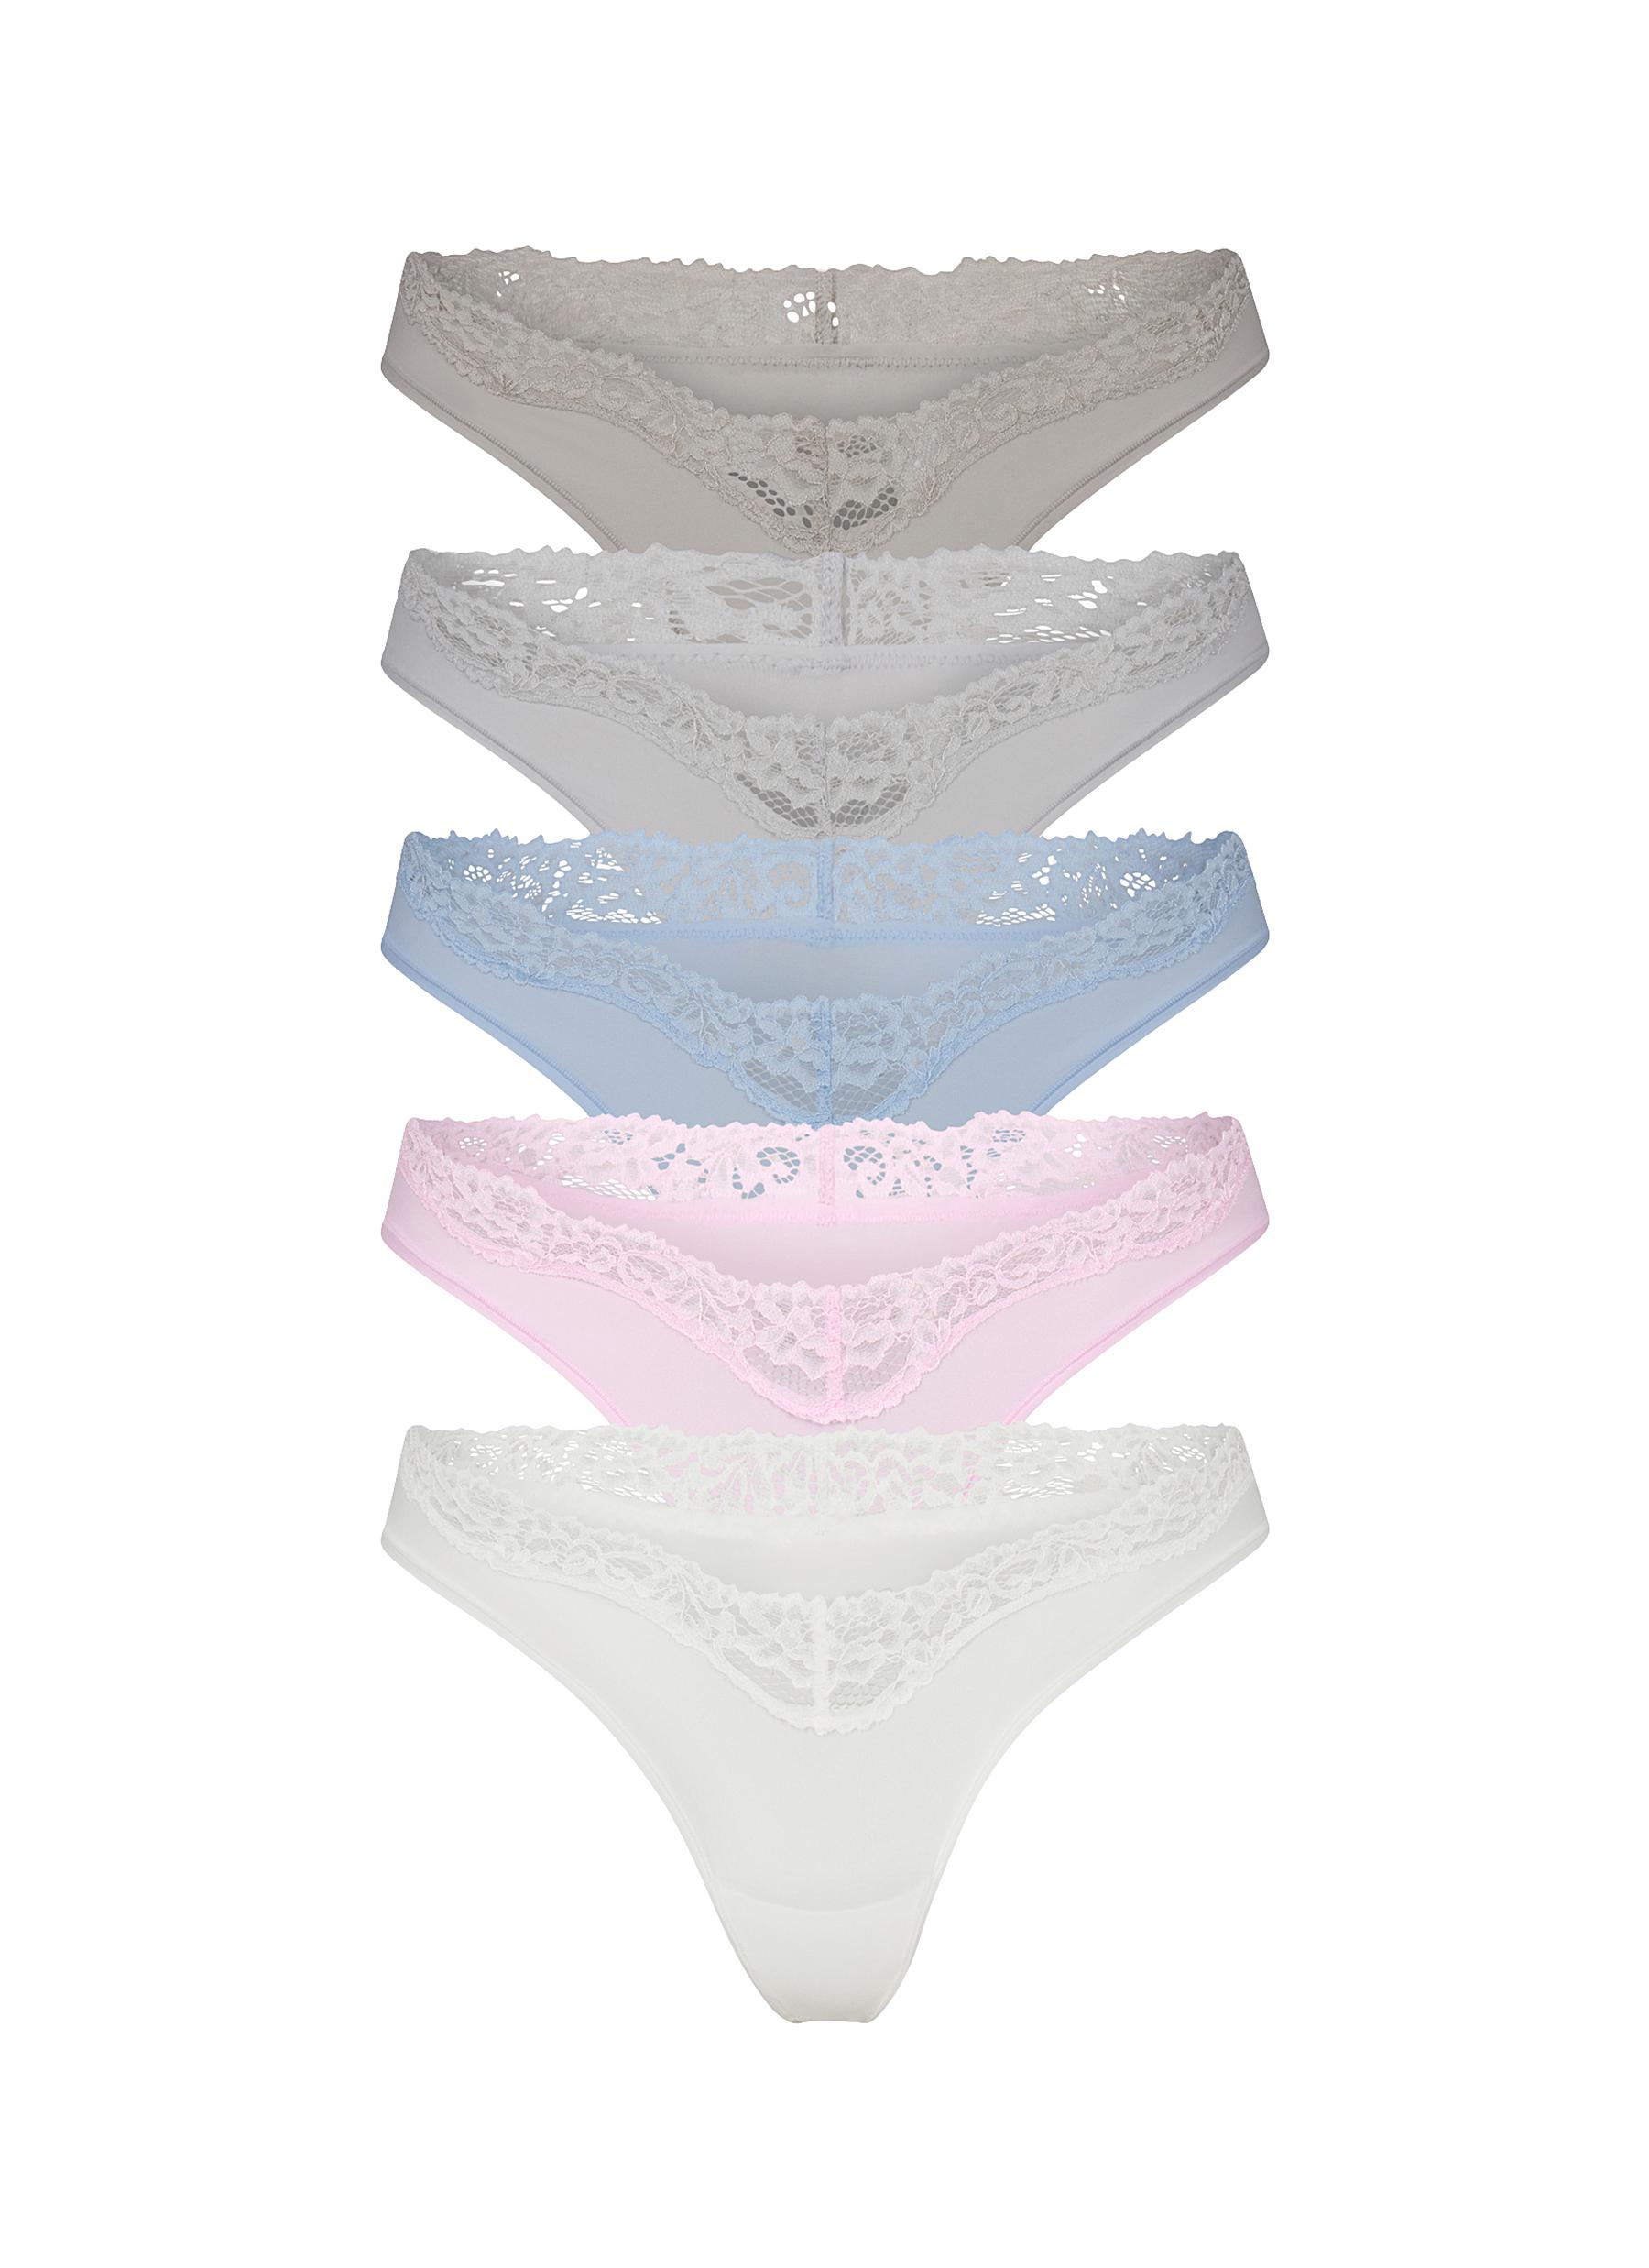 SKIMS - Women's Fits Everybody Lace Dipped Thong